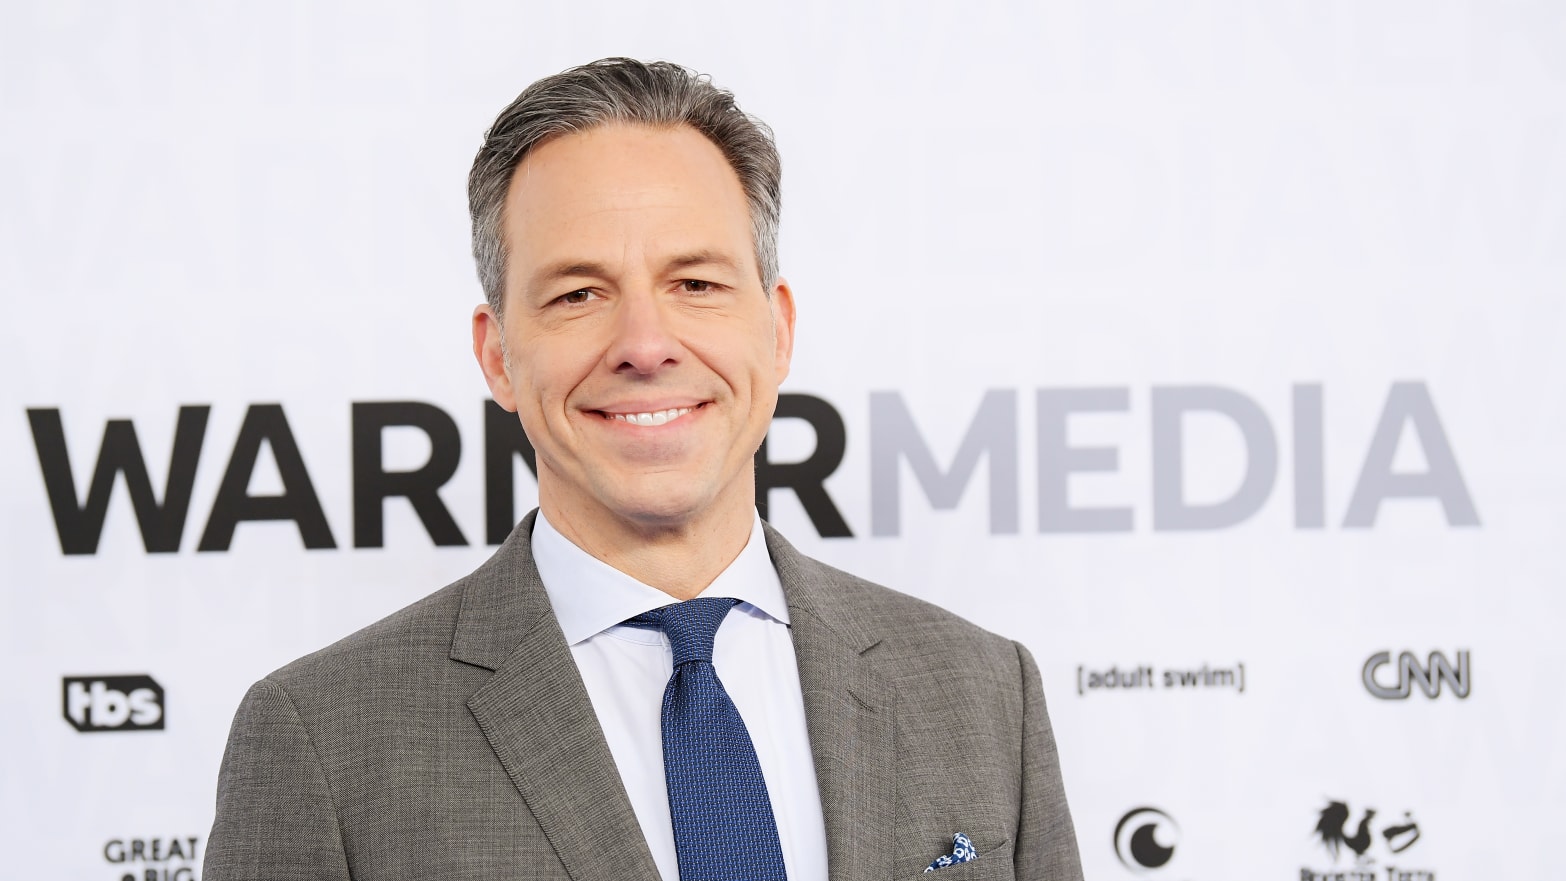 Jake Tapper says that things have never been better at CNN now that Chris Licht is gone